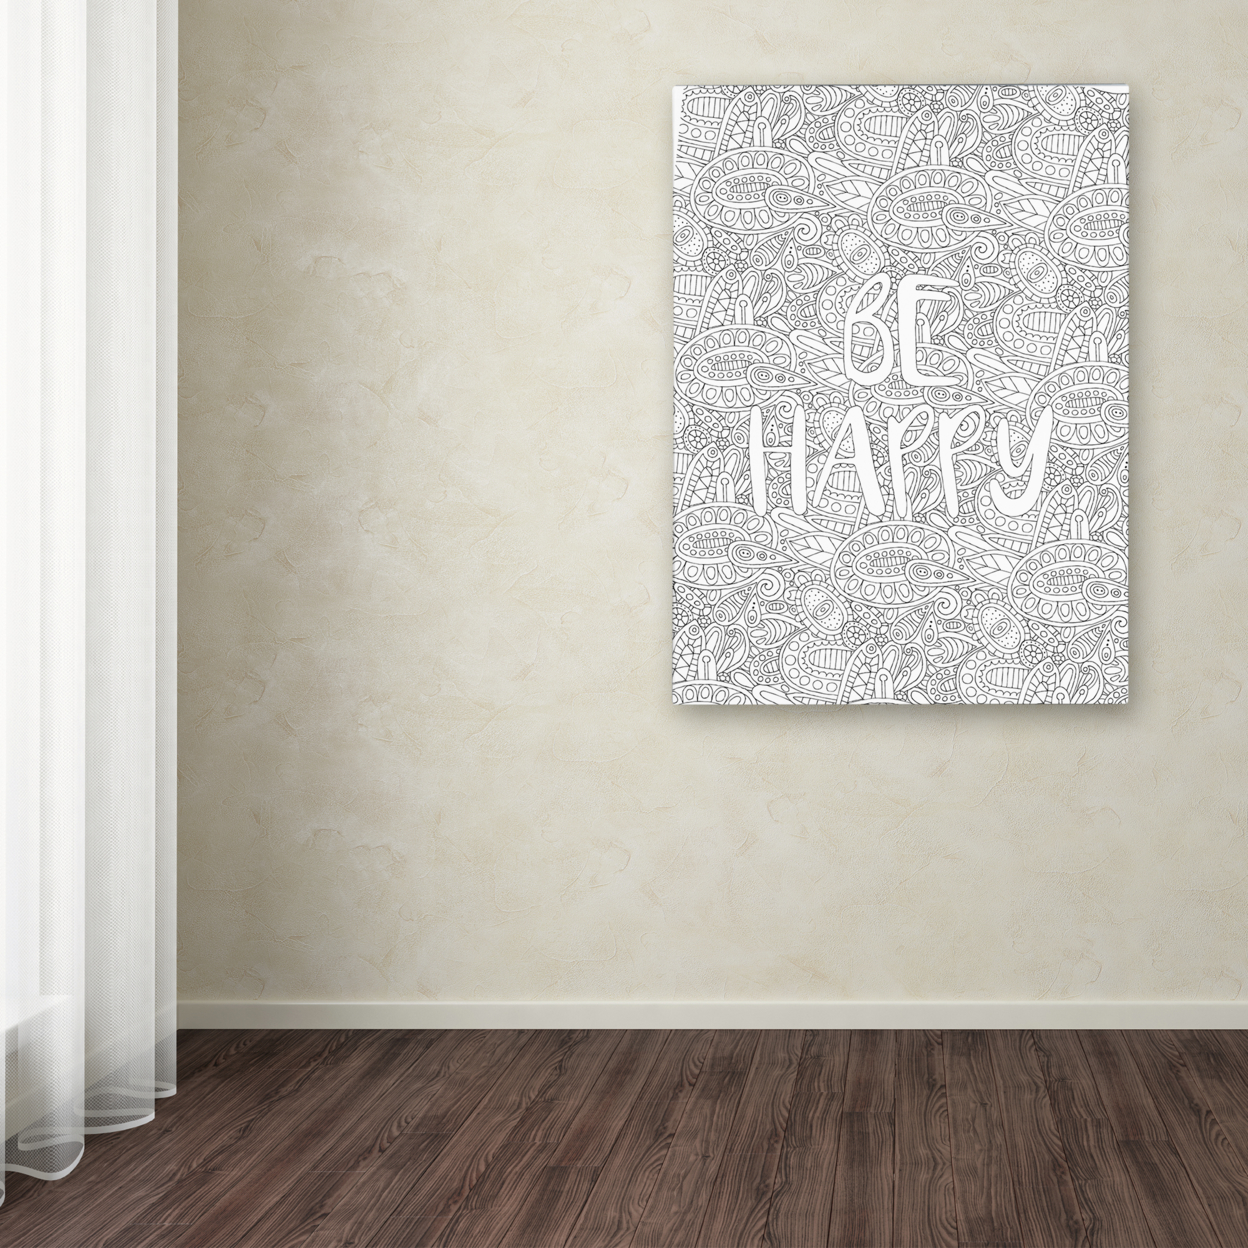 Hello Angel 'Inspirational Quotes 31' Canvas Wall Art 35 X 47 Inches